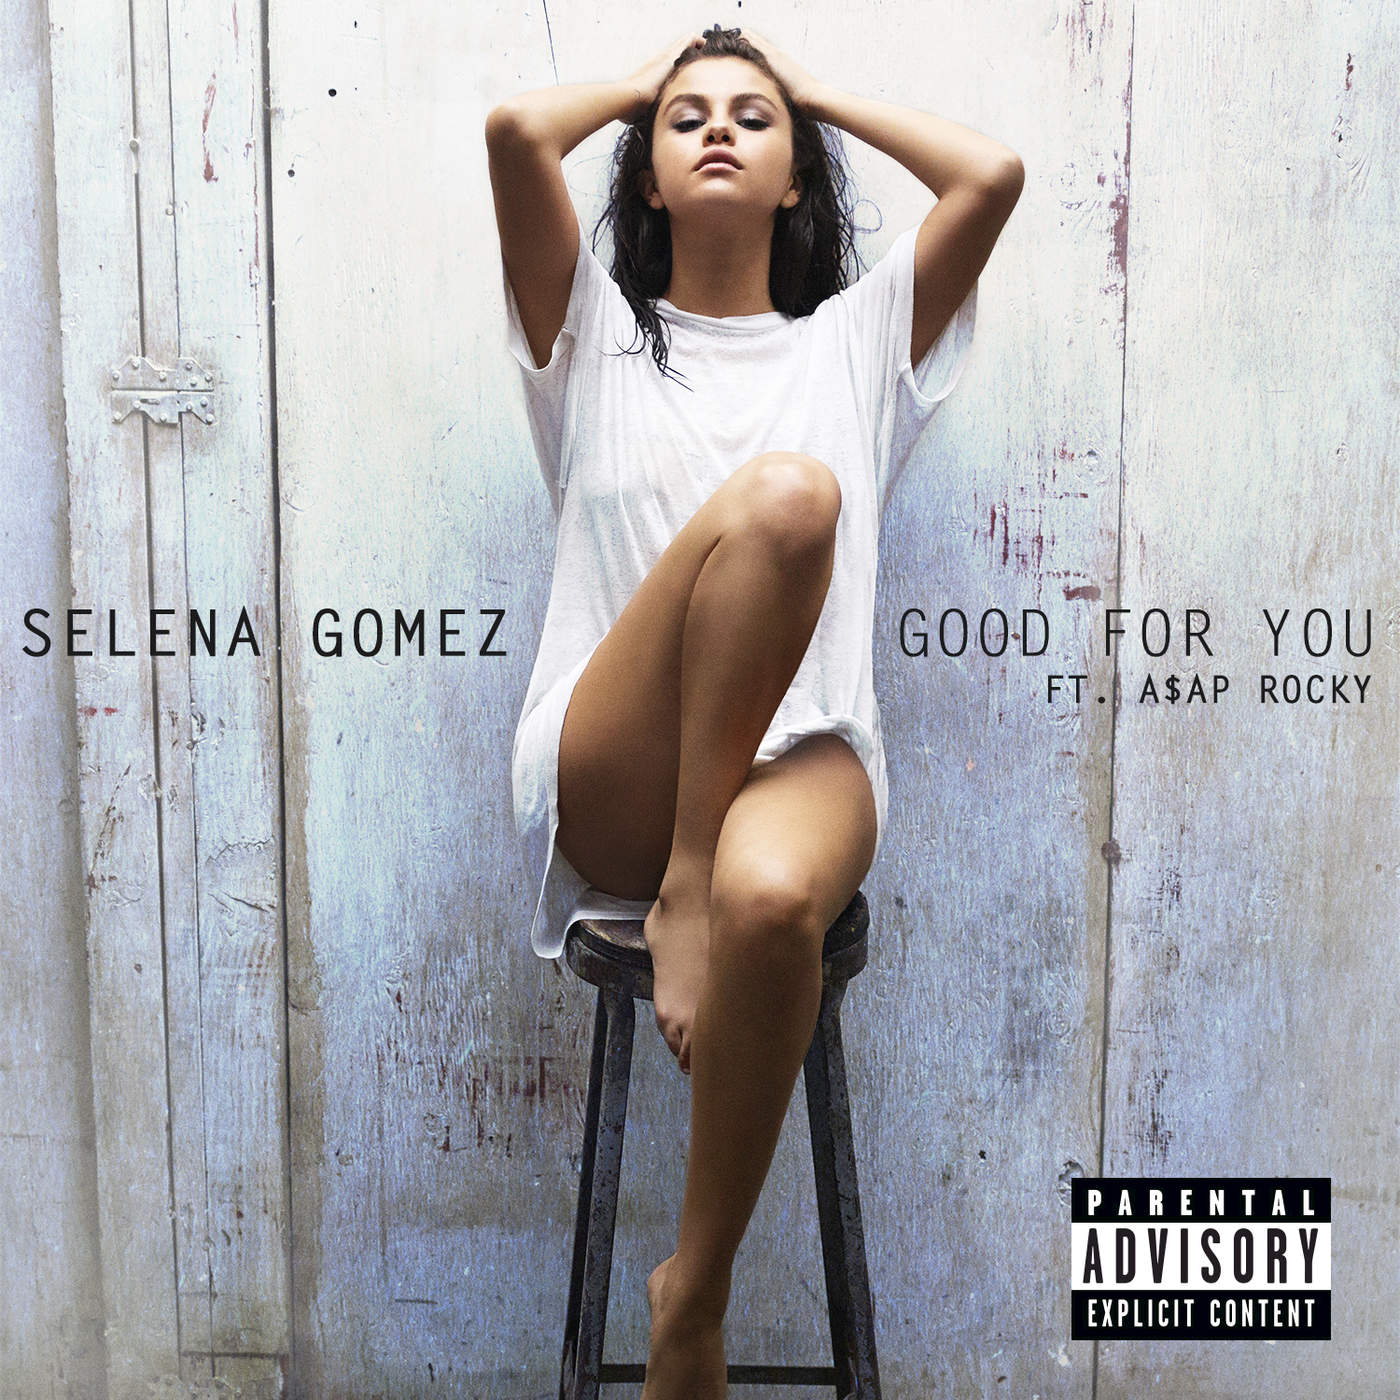 Selena Gomez ft. featuring A$AP Rocky Good for You cover artwork